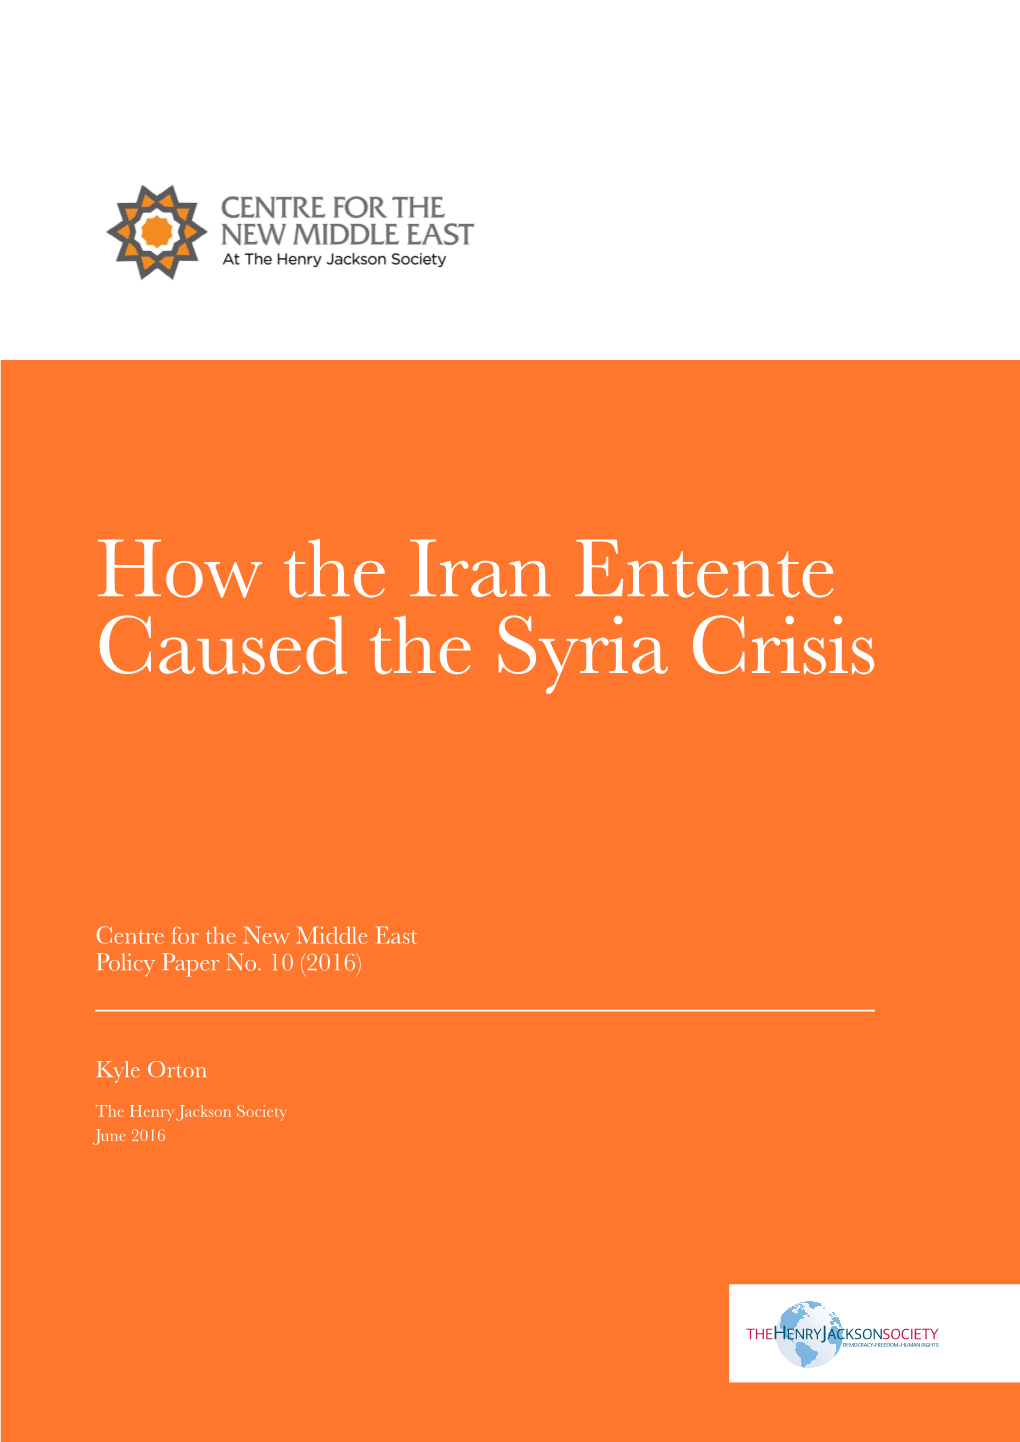 How the Iran Entente Caused the Syria Crisis